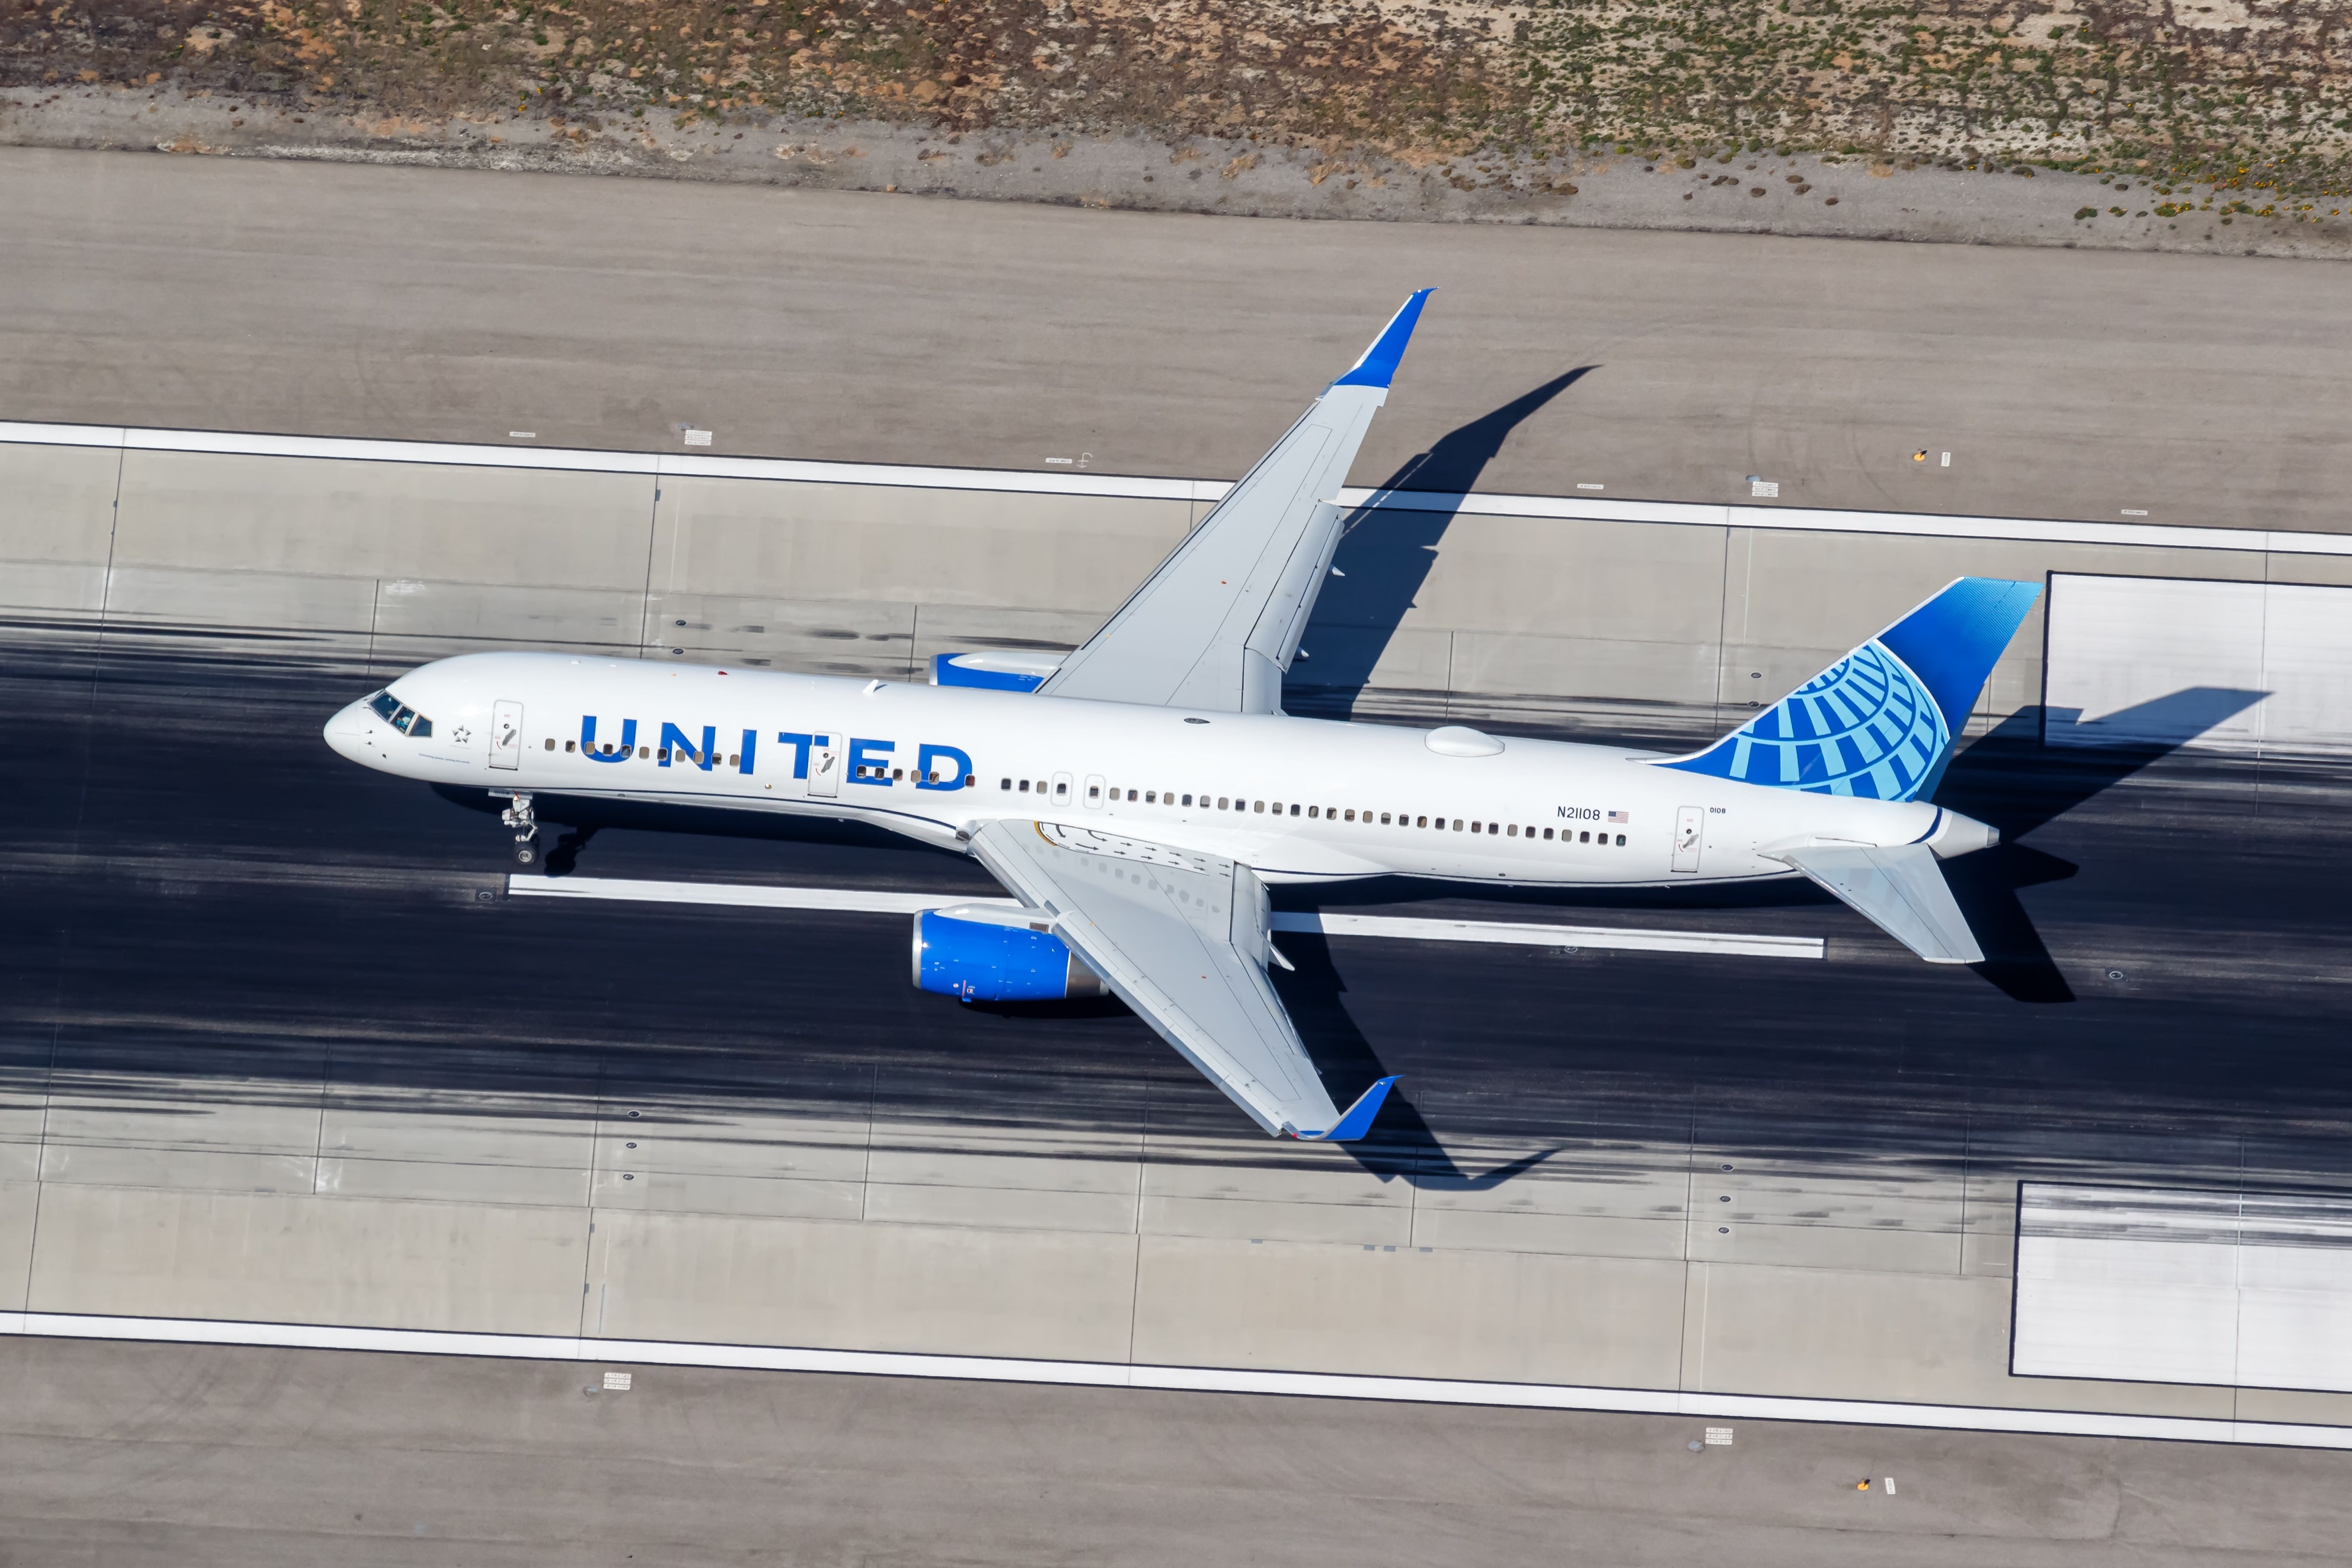 A United Airlines Boeing 757 taking off